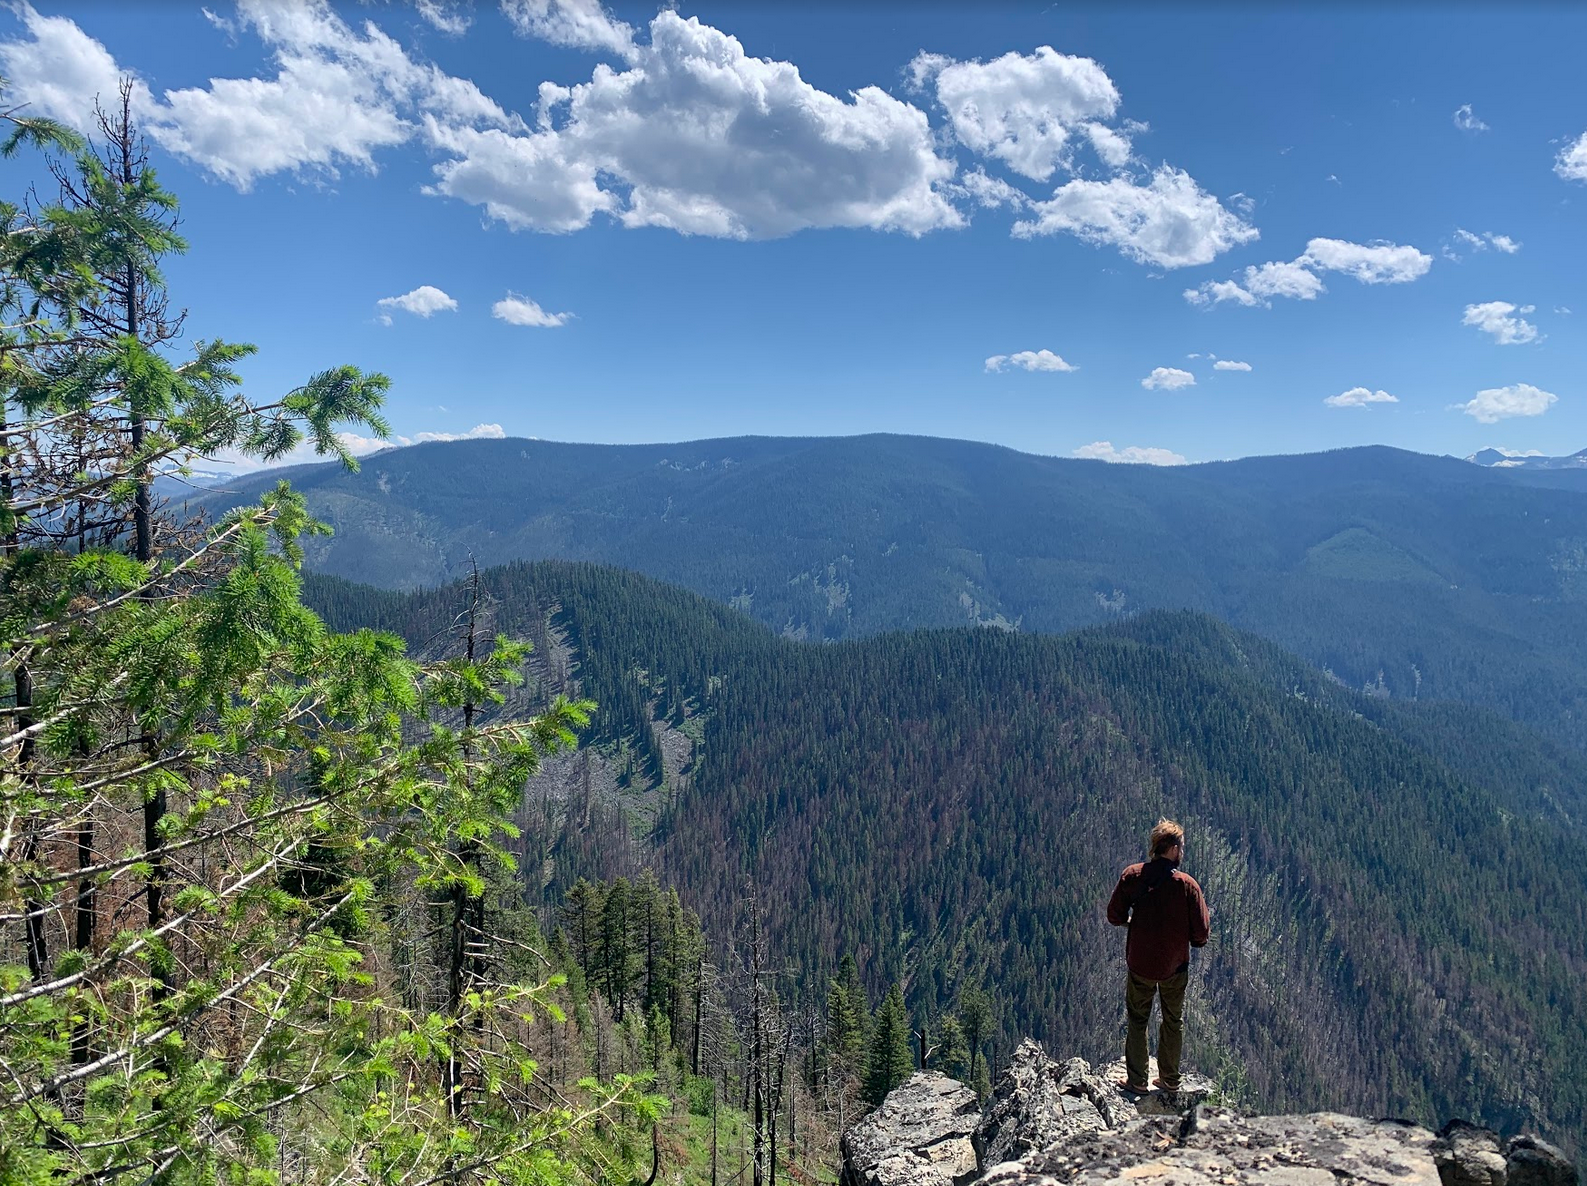 an expansive view shows a sunny blue sky, rolling mountains with conifer forest, and a biologist standing on the edge of a rocky ledge, overlooking it all